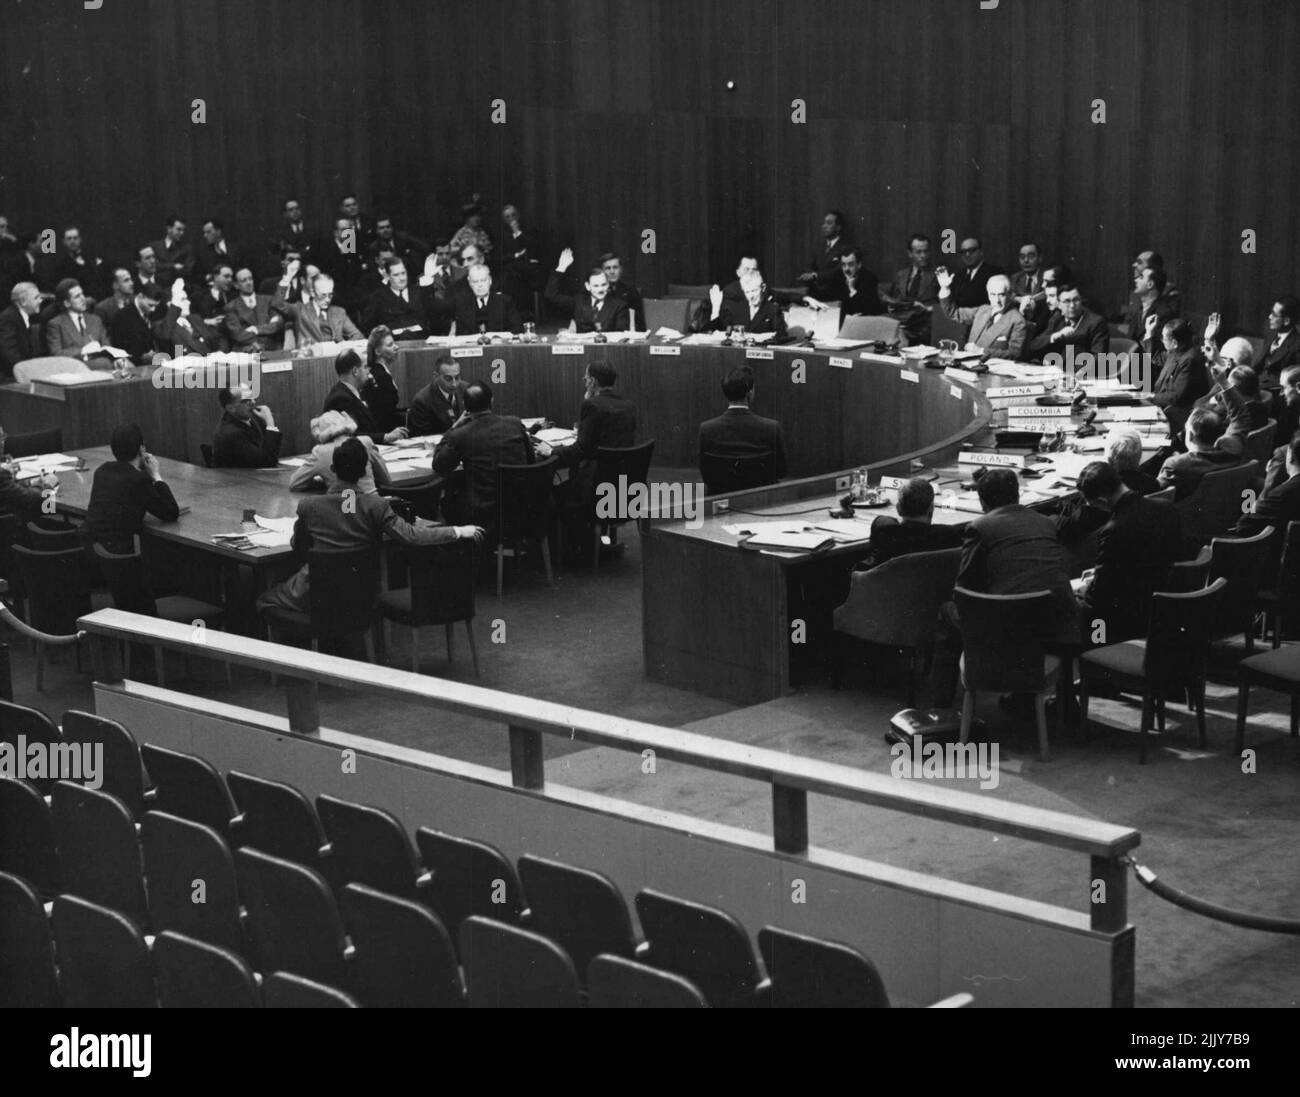 United nations headquarters 1946 Black and White Stock Photos & Images ...